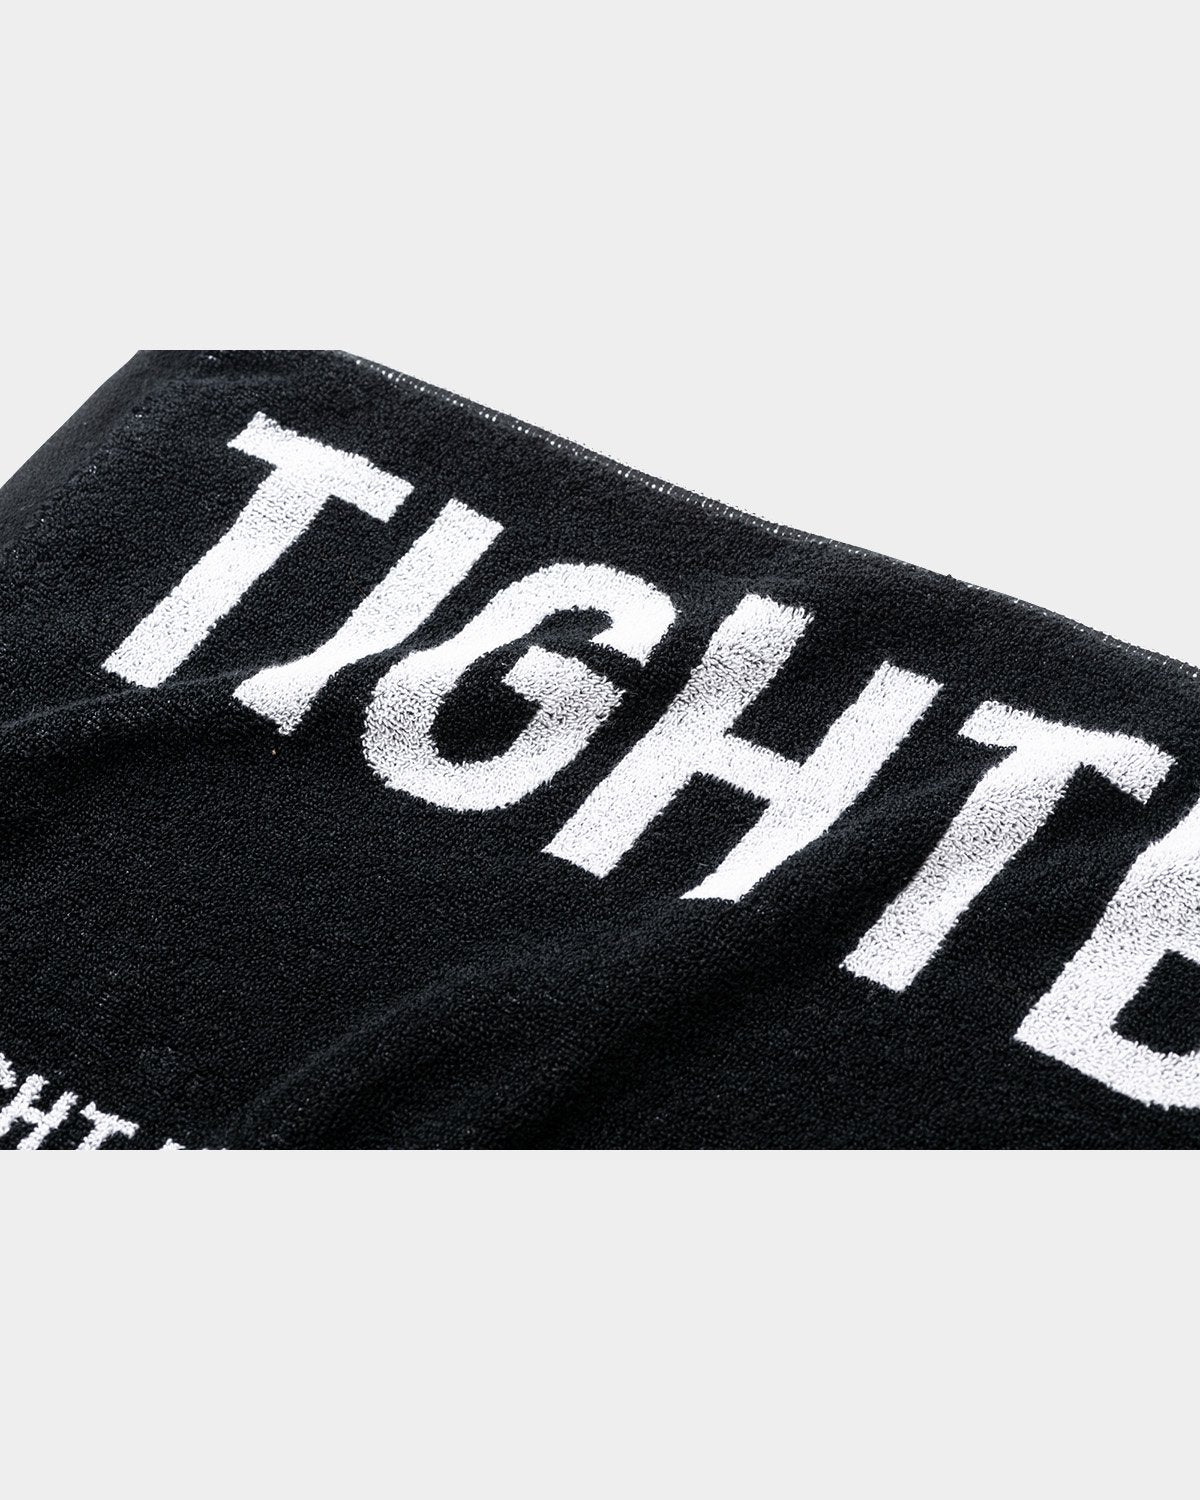 TIGHTBOOTH LOGO FACE TOWEL